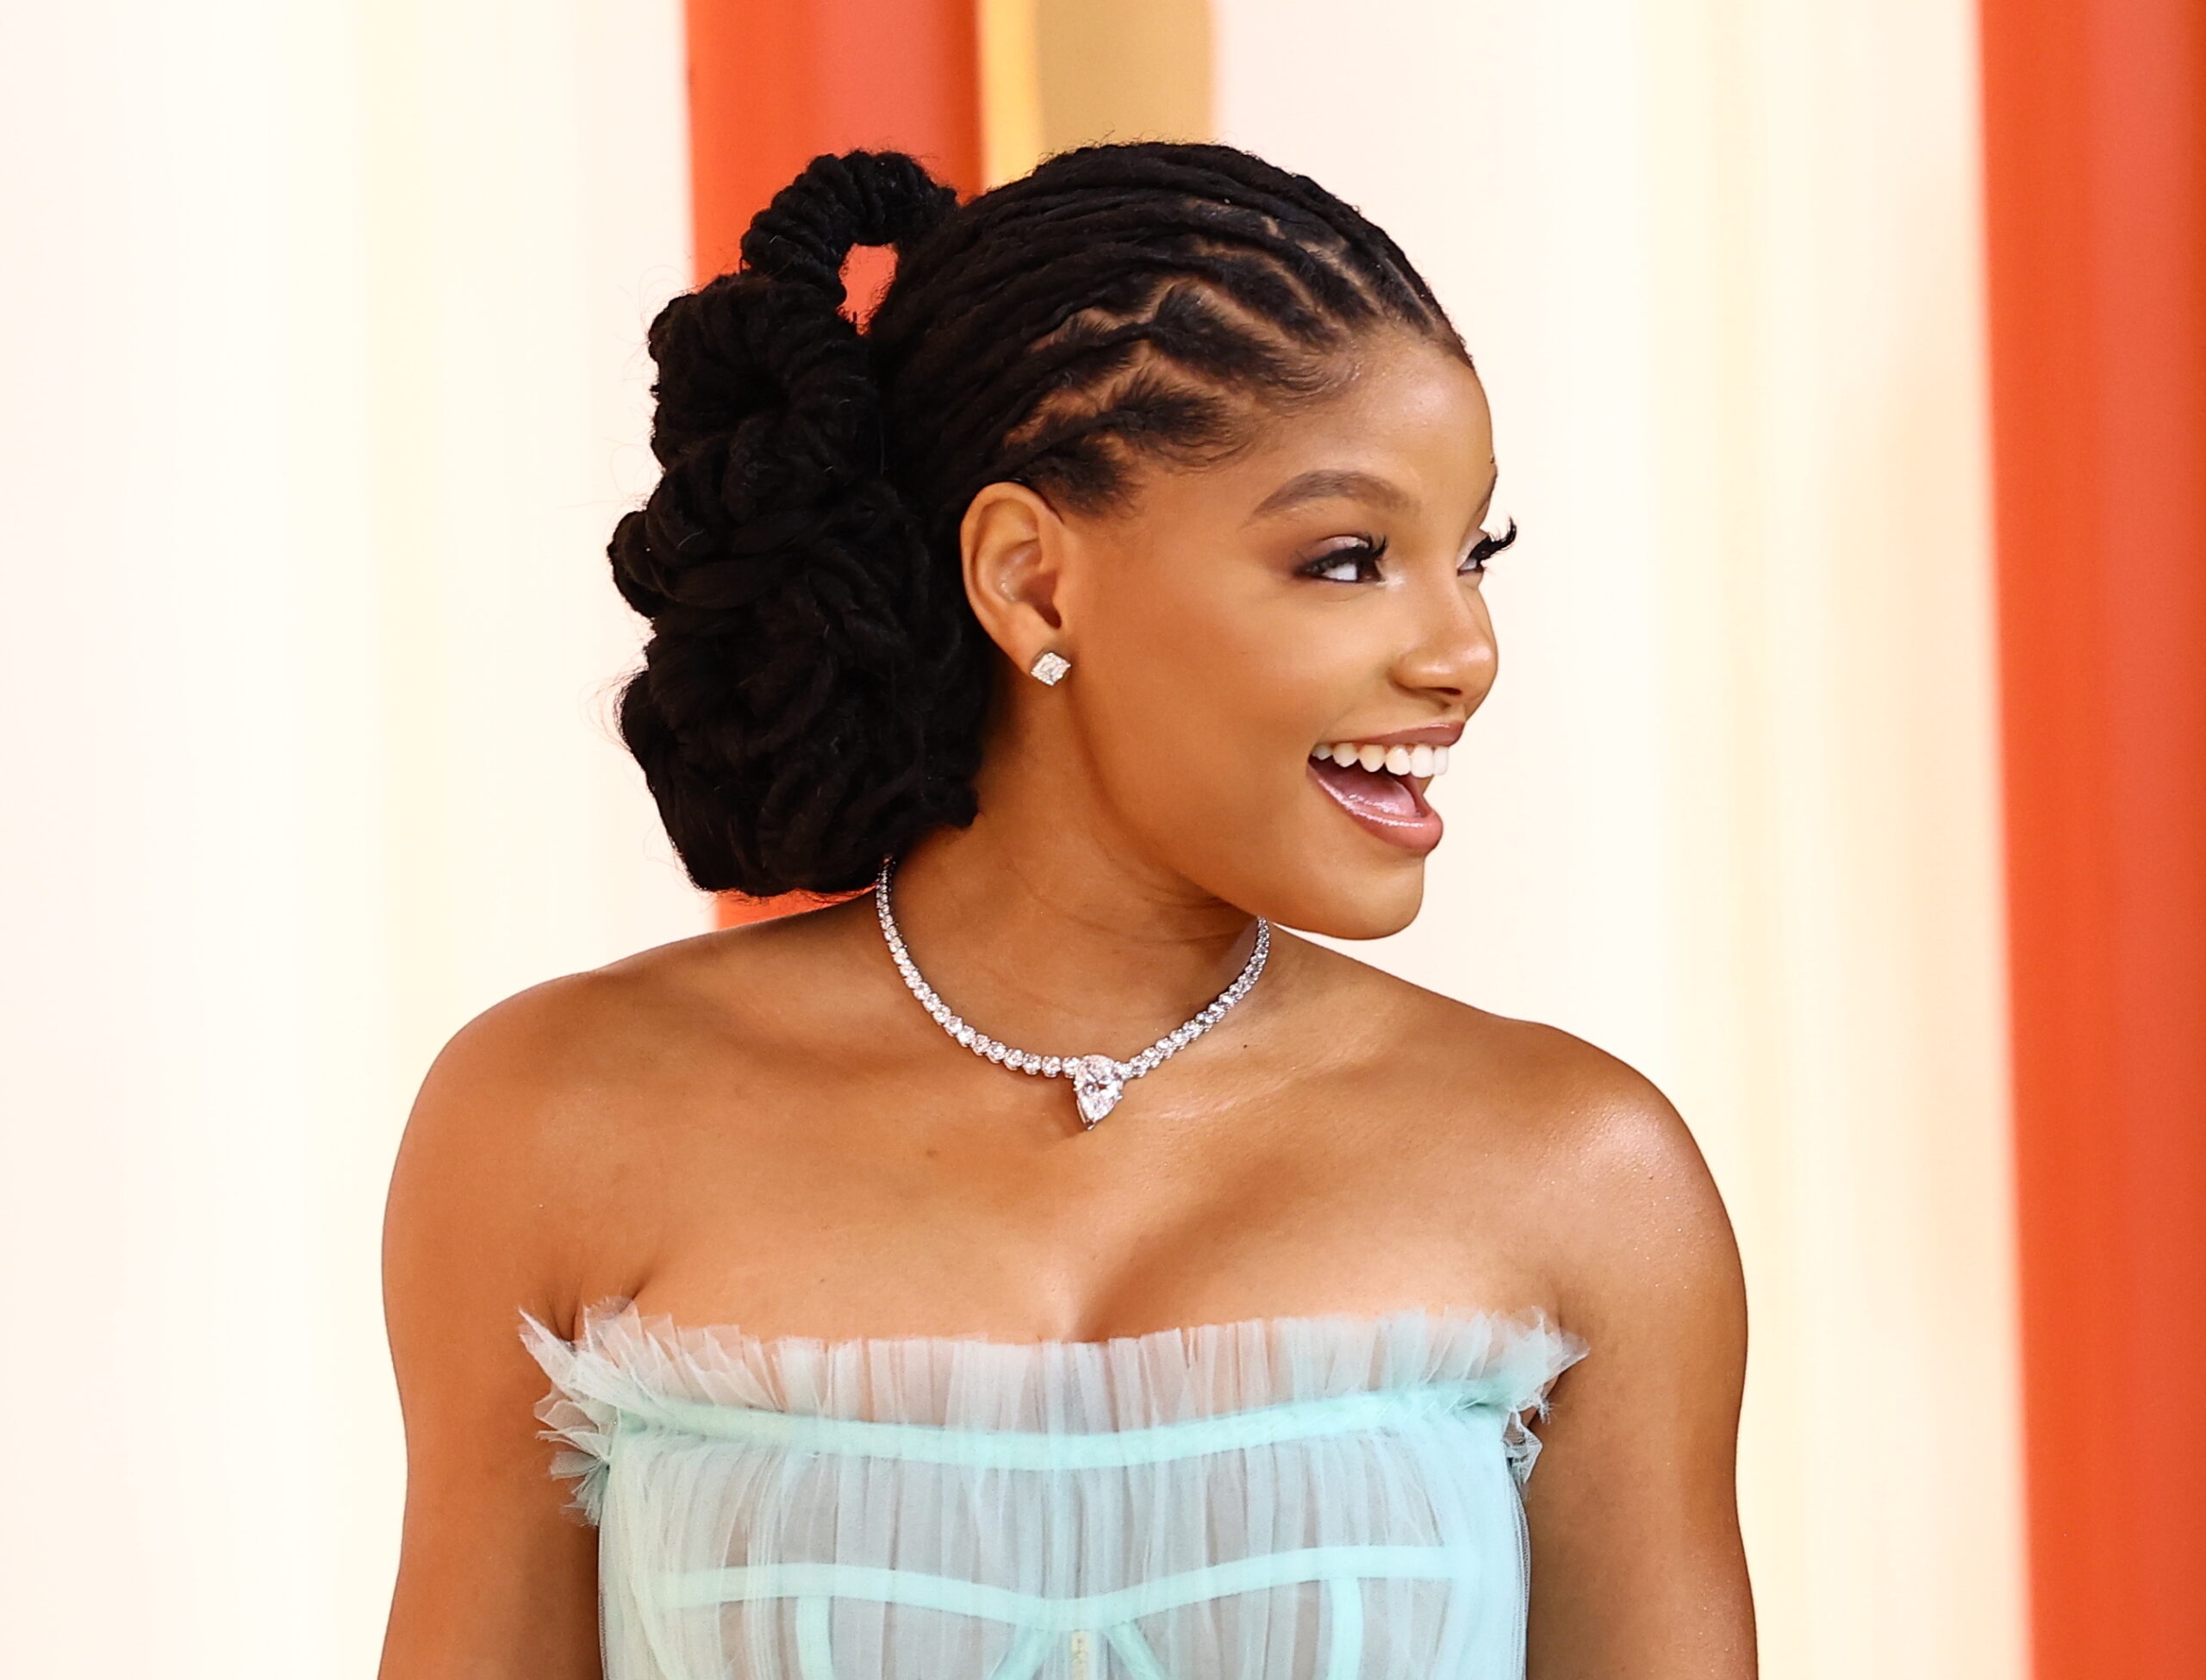 ‘The Little Mermaid’ Actress Halle Bailey Praises Feminist Storyline Updates, Says It’s More Than ‘Wanting To Leave The Ocean For A Boy’